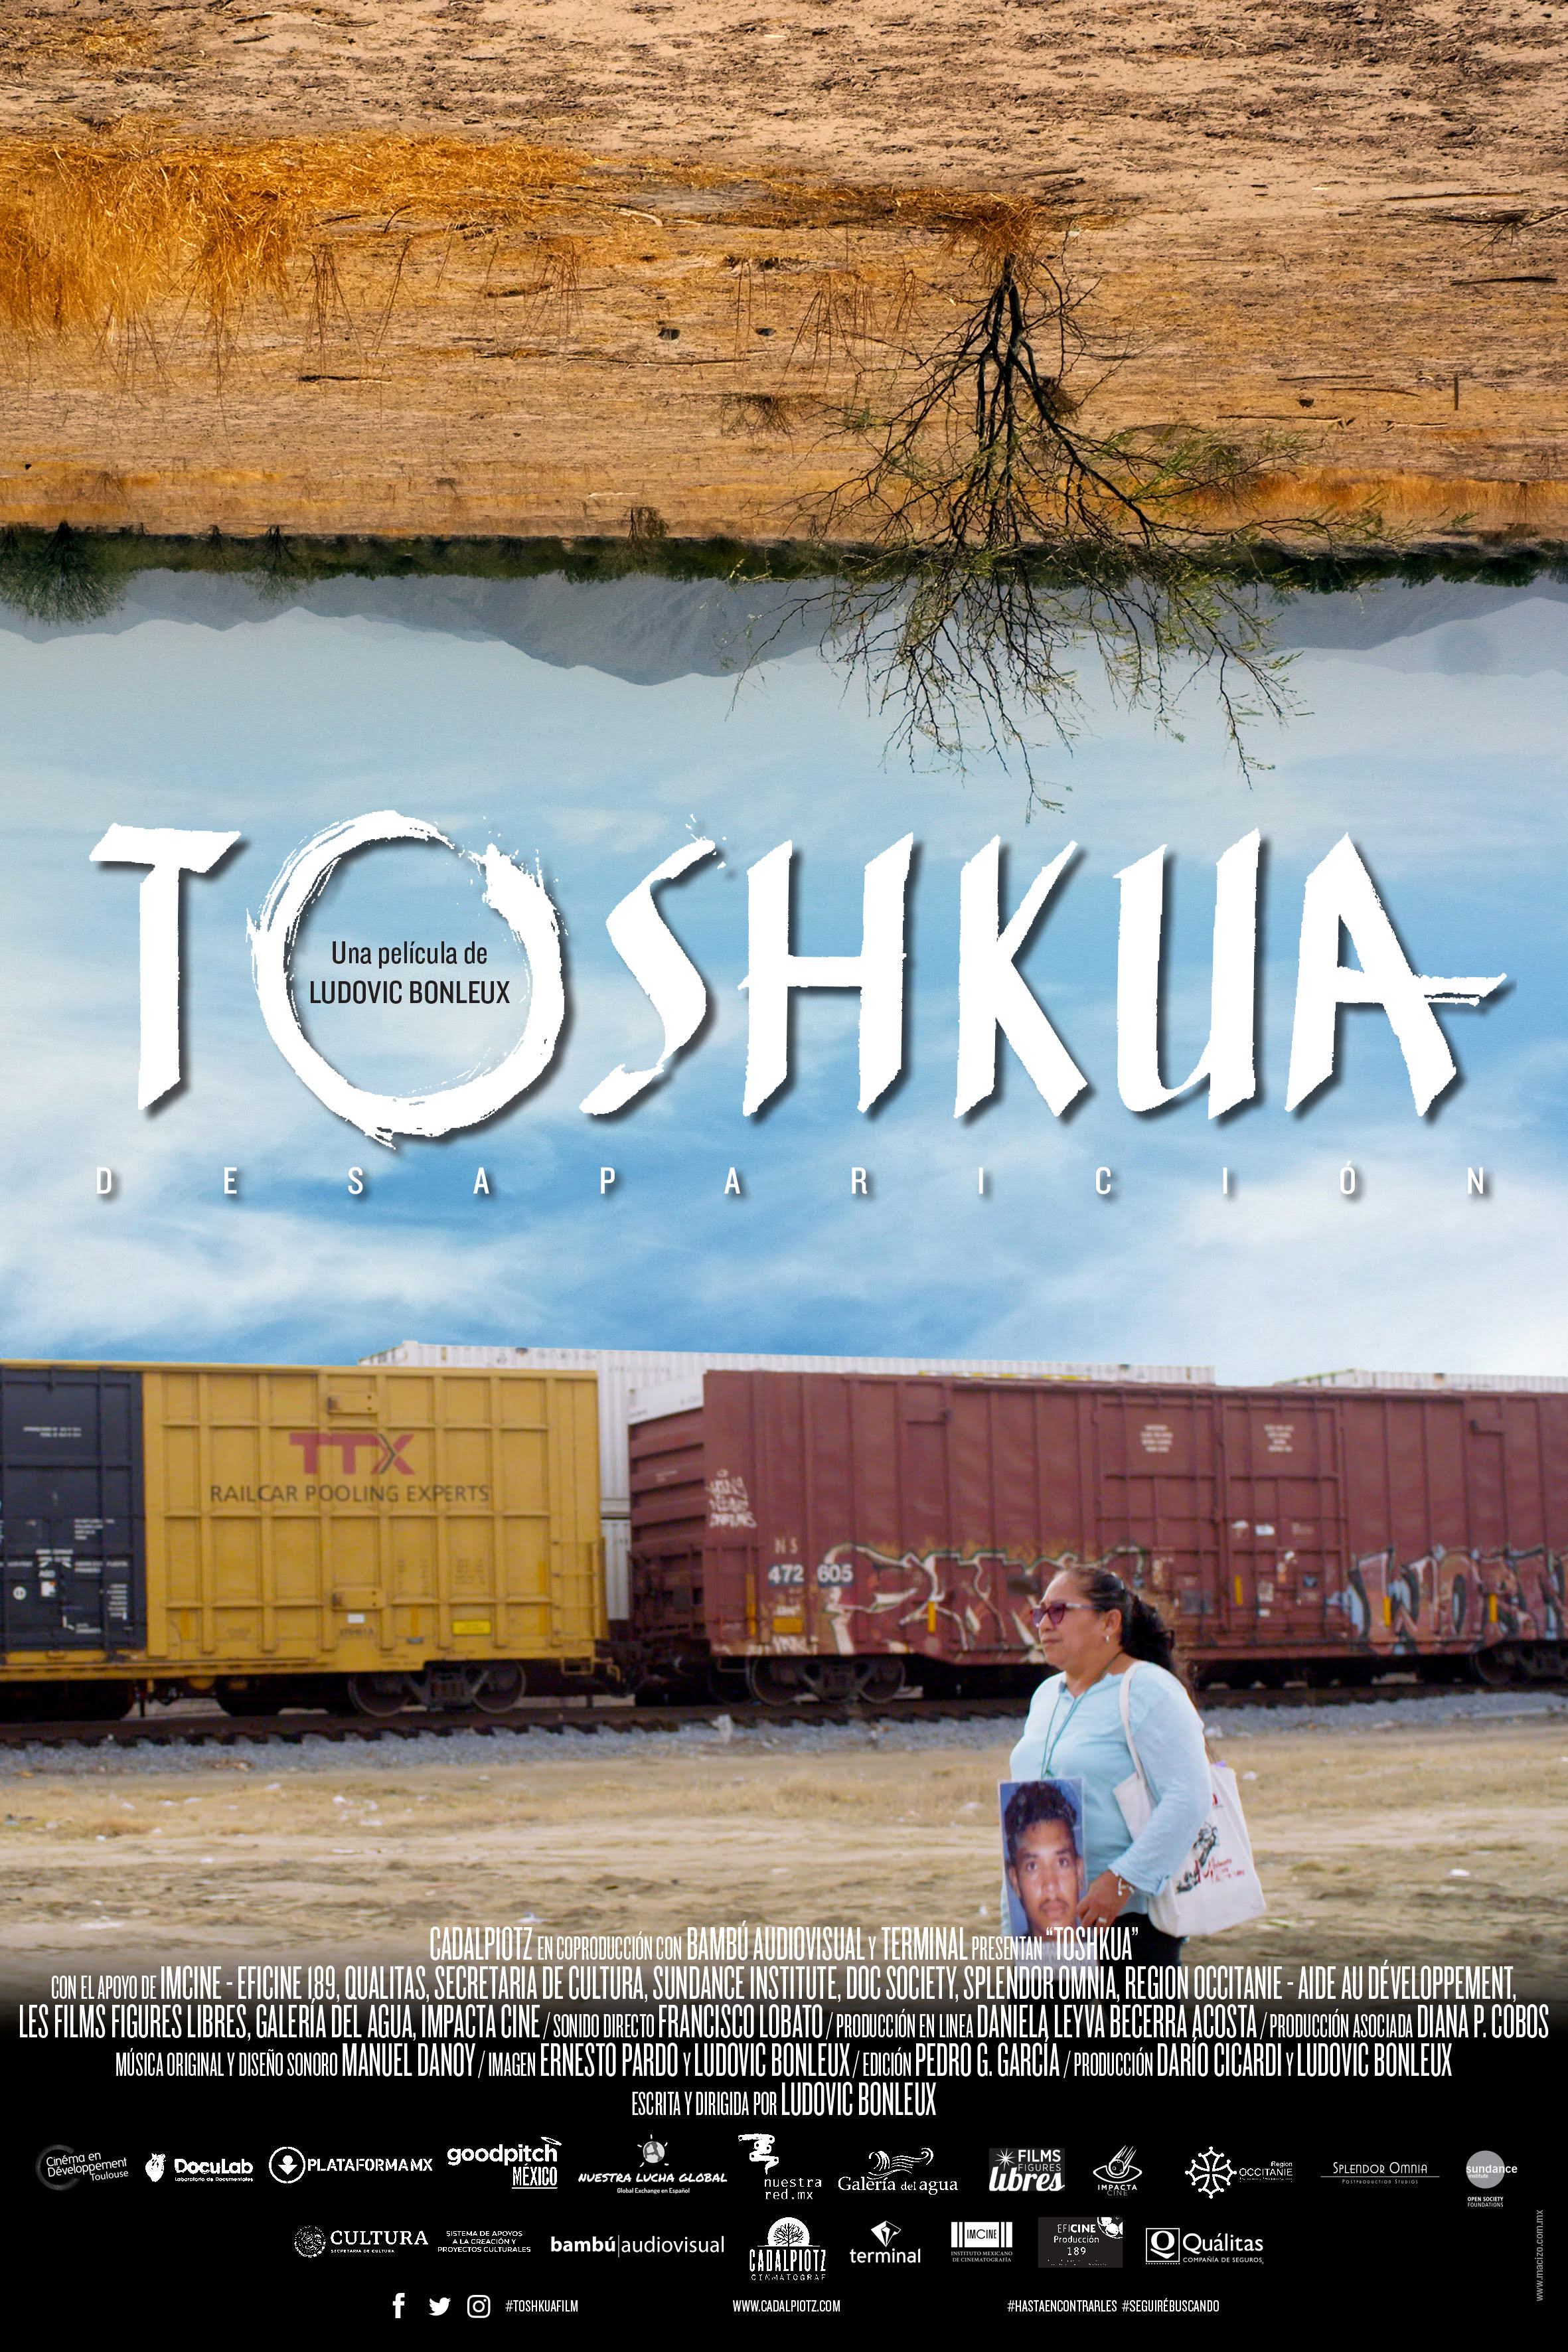 Poster of Toshkua, a film by Ludovic Bonleux